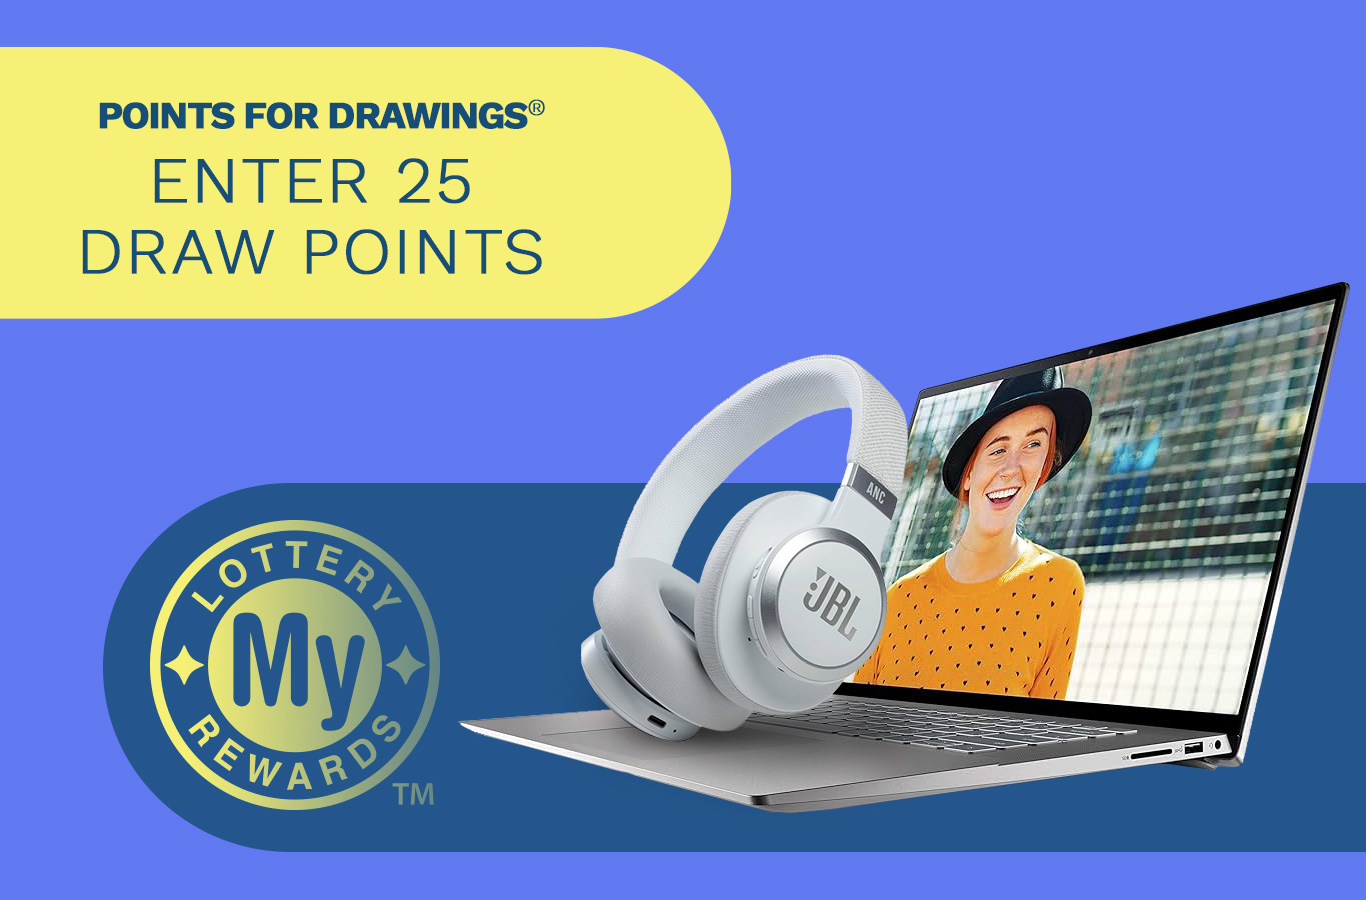 Here's your chance to win a Dell® Laptop & JBL® Headphones! Enter by Monday, April 1st.